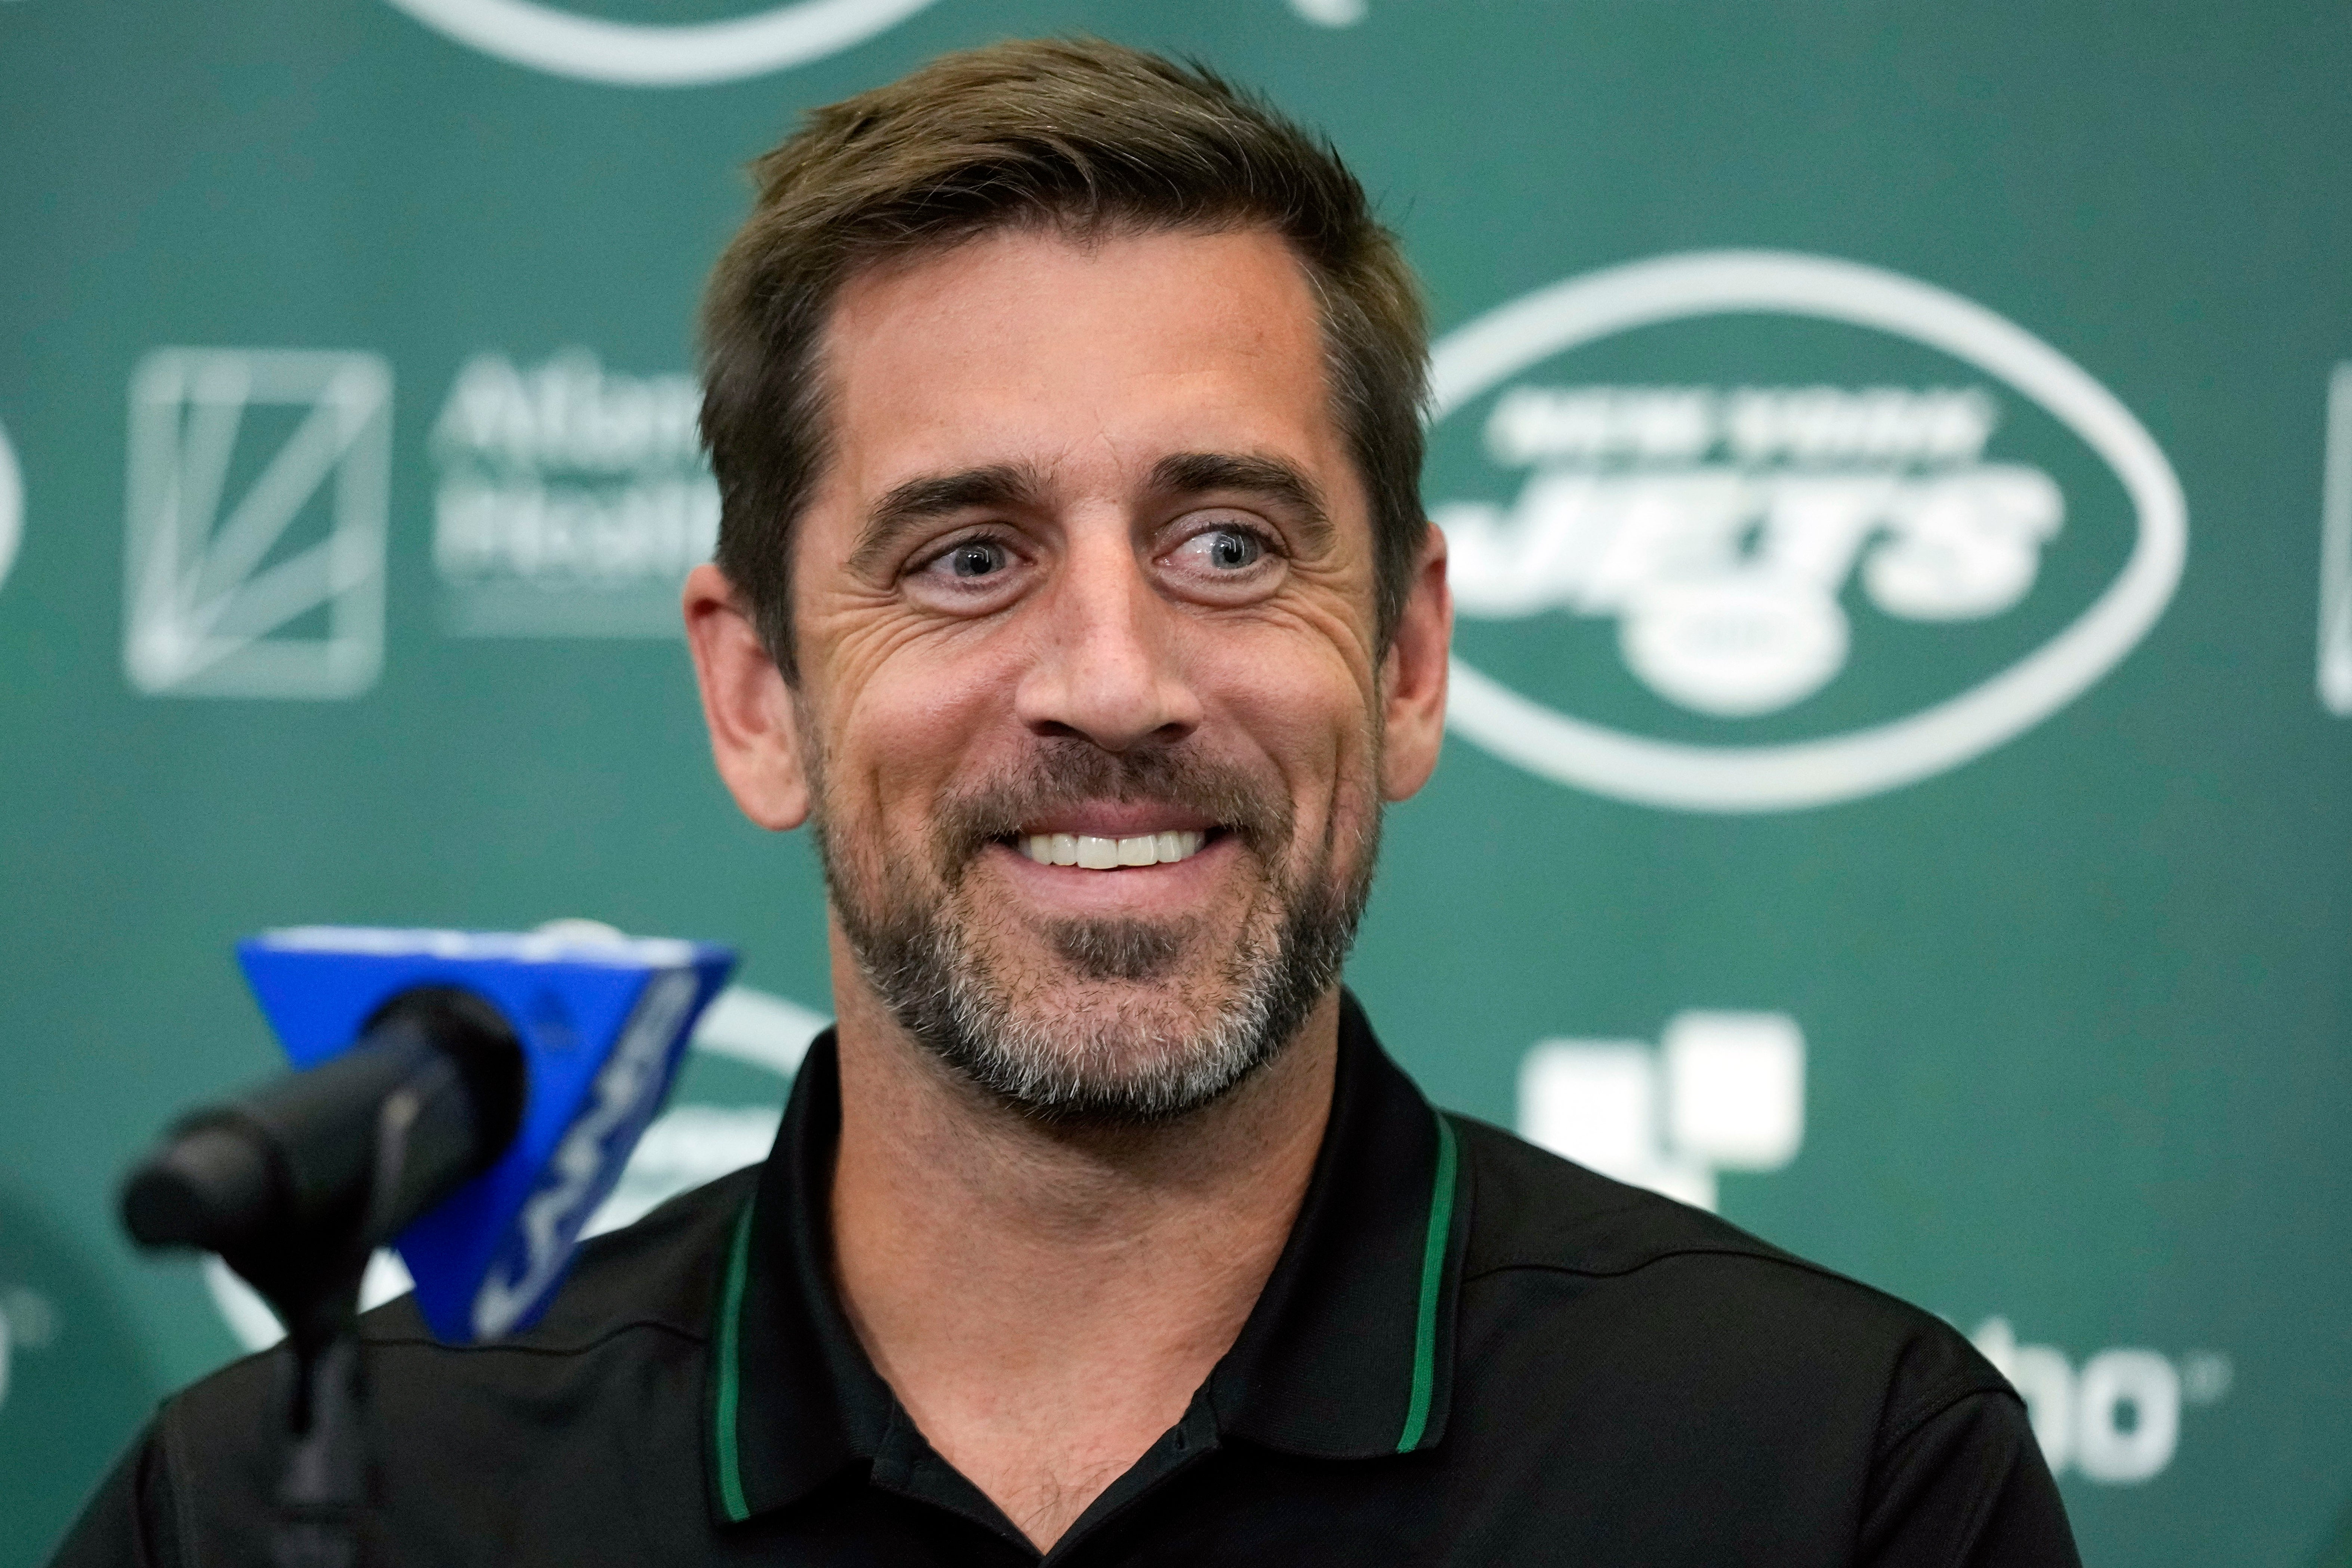 Jets know Aaron Rodgers' arrival changes expectations